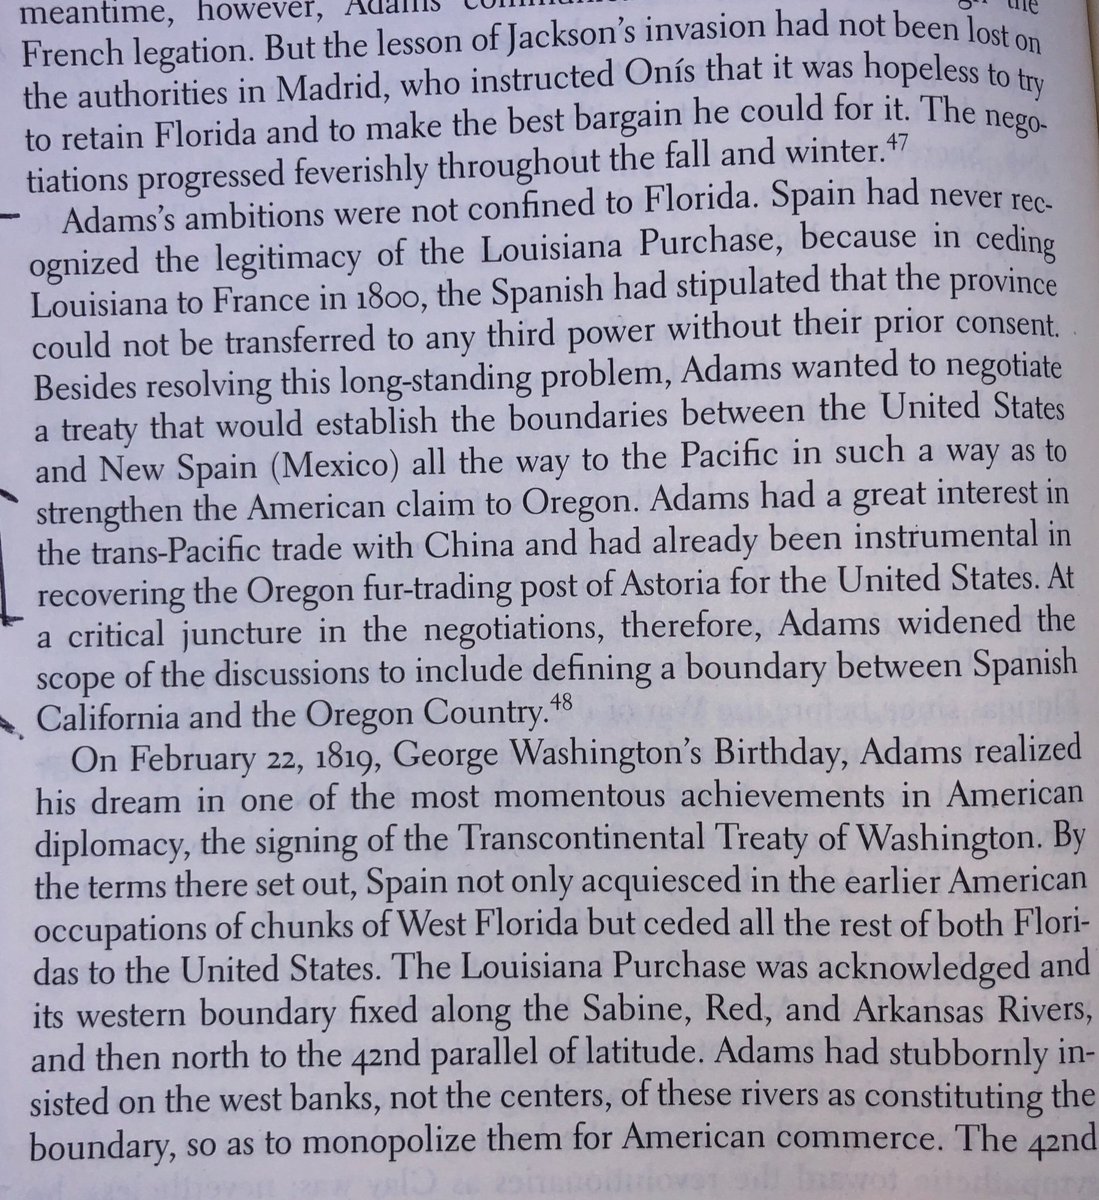 Turns out Andrew Jackson’s undeclared 1818 invasion of Spanish Florida helped the U.S. effectively become a two-ocean power, forcing Spain to relinquish claims to Oregon Country: